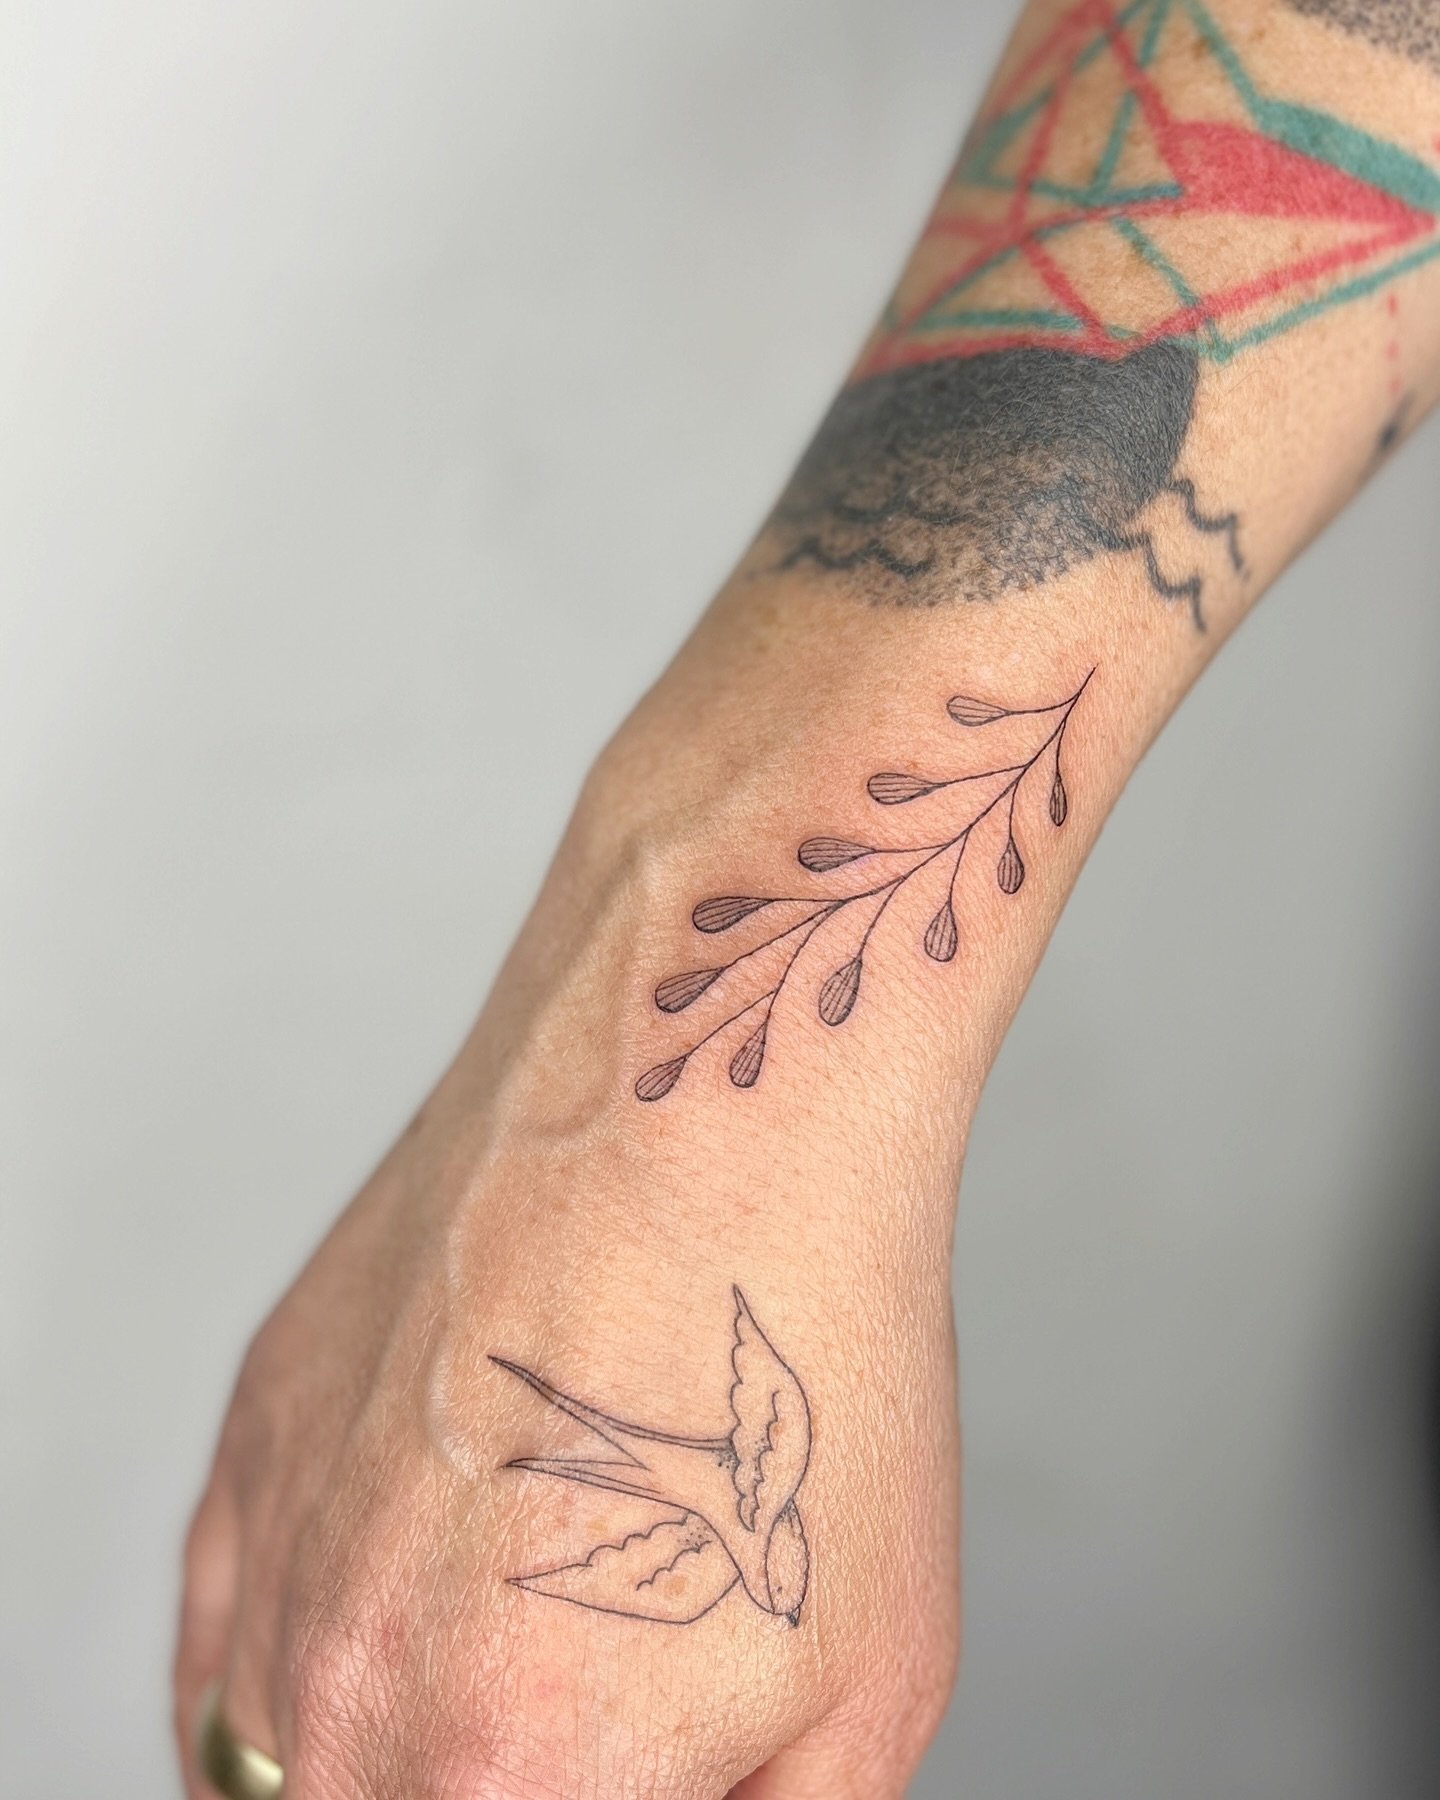 Little filler today 🌿 Love the placement 🤍✨
Thank you!!

⫸ 
Booking info: If you want to get inked, please stay patient. My books are closed till June 2024. New dates will be  announced soon 🫶🏻 #nodms 

#frauinestattoo #branchtattoo #finelinetatt